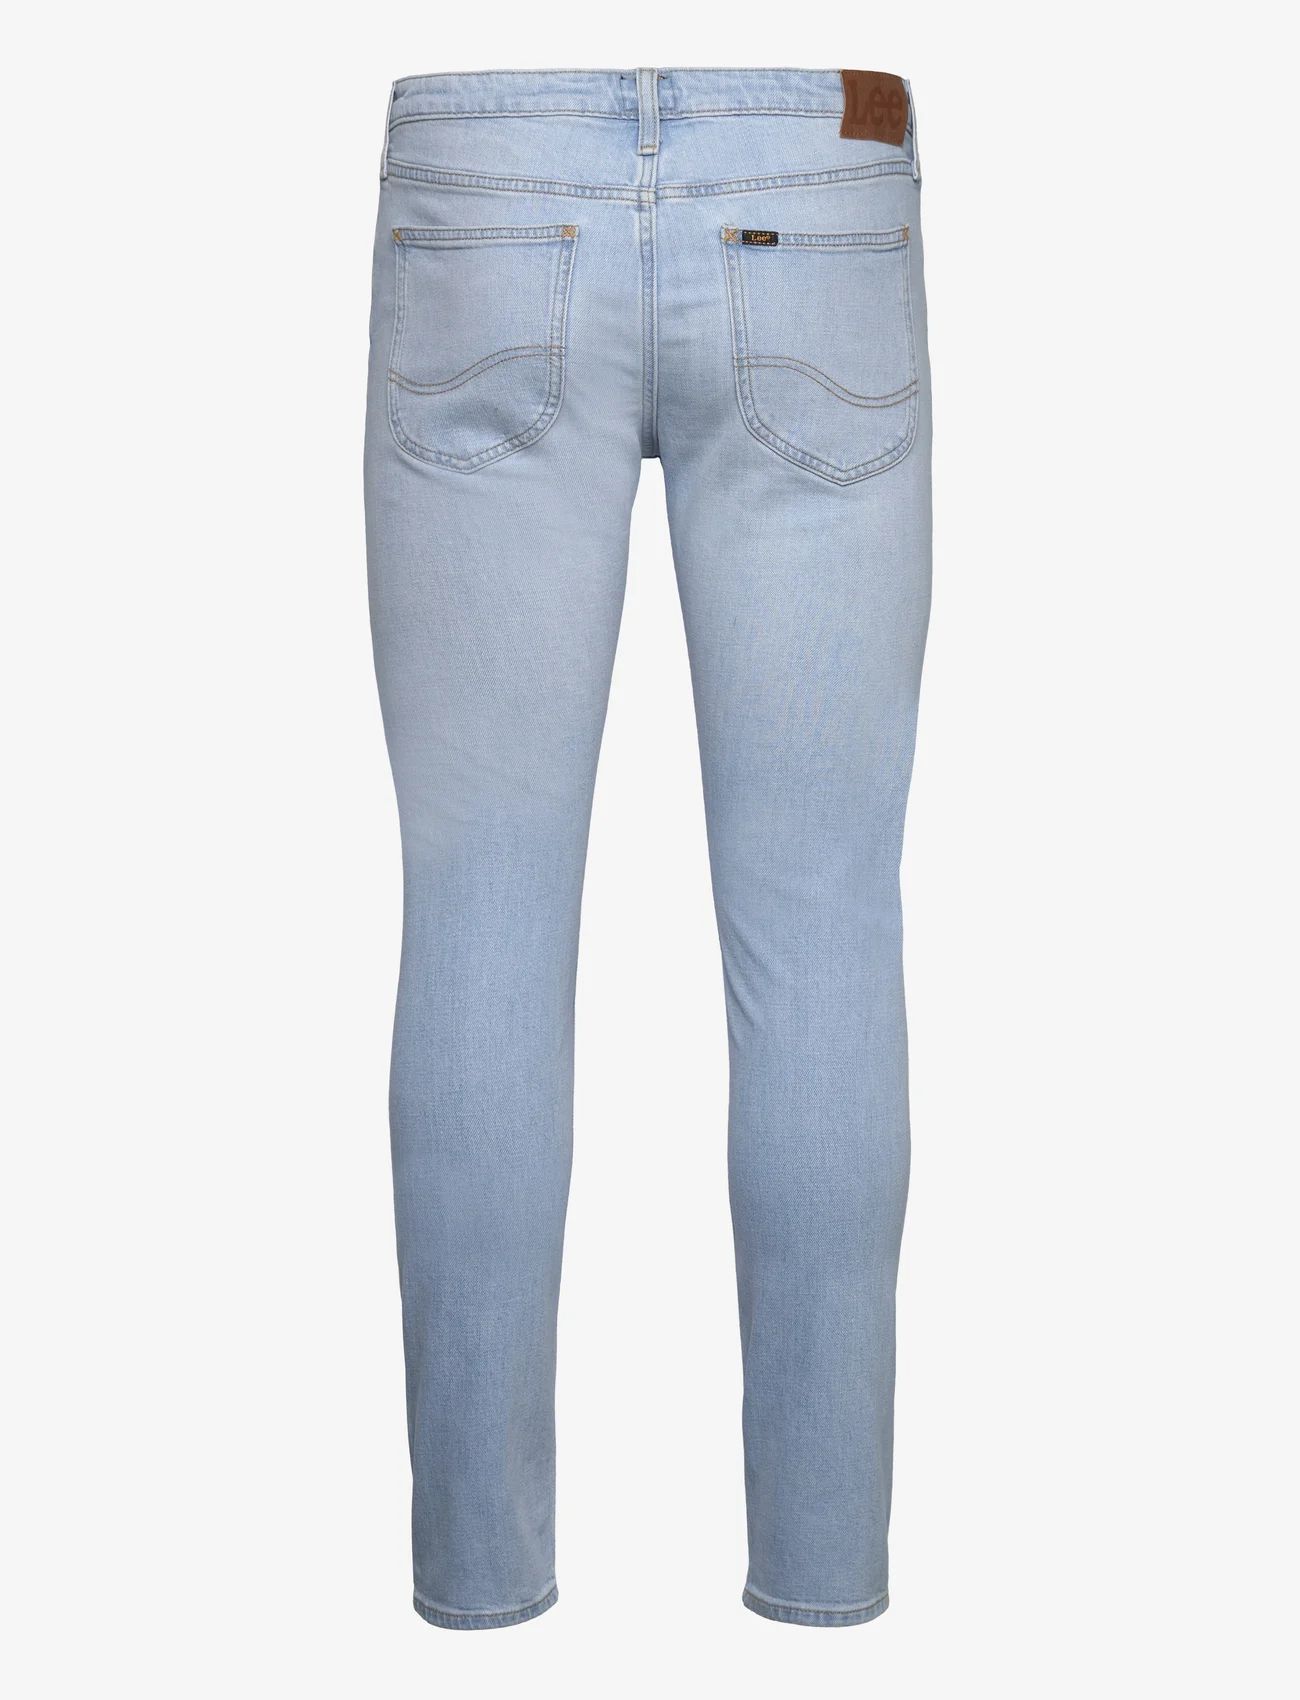 Lee Jeans - MALONE - skinny jeans - bleached beach - 1